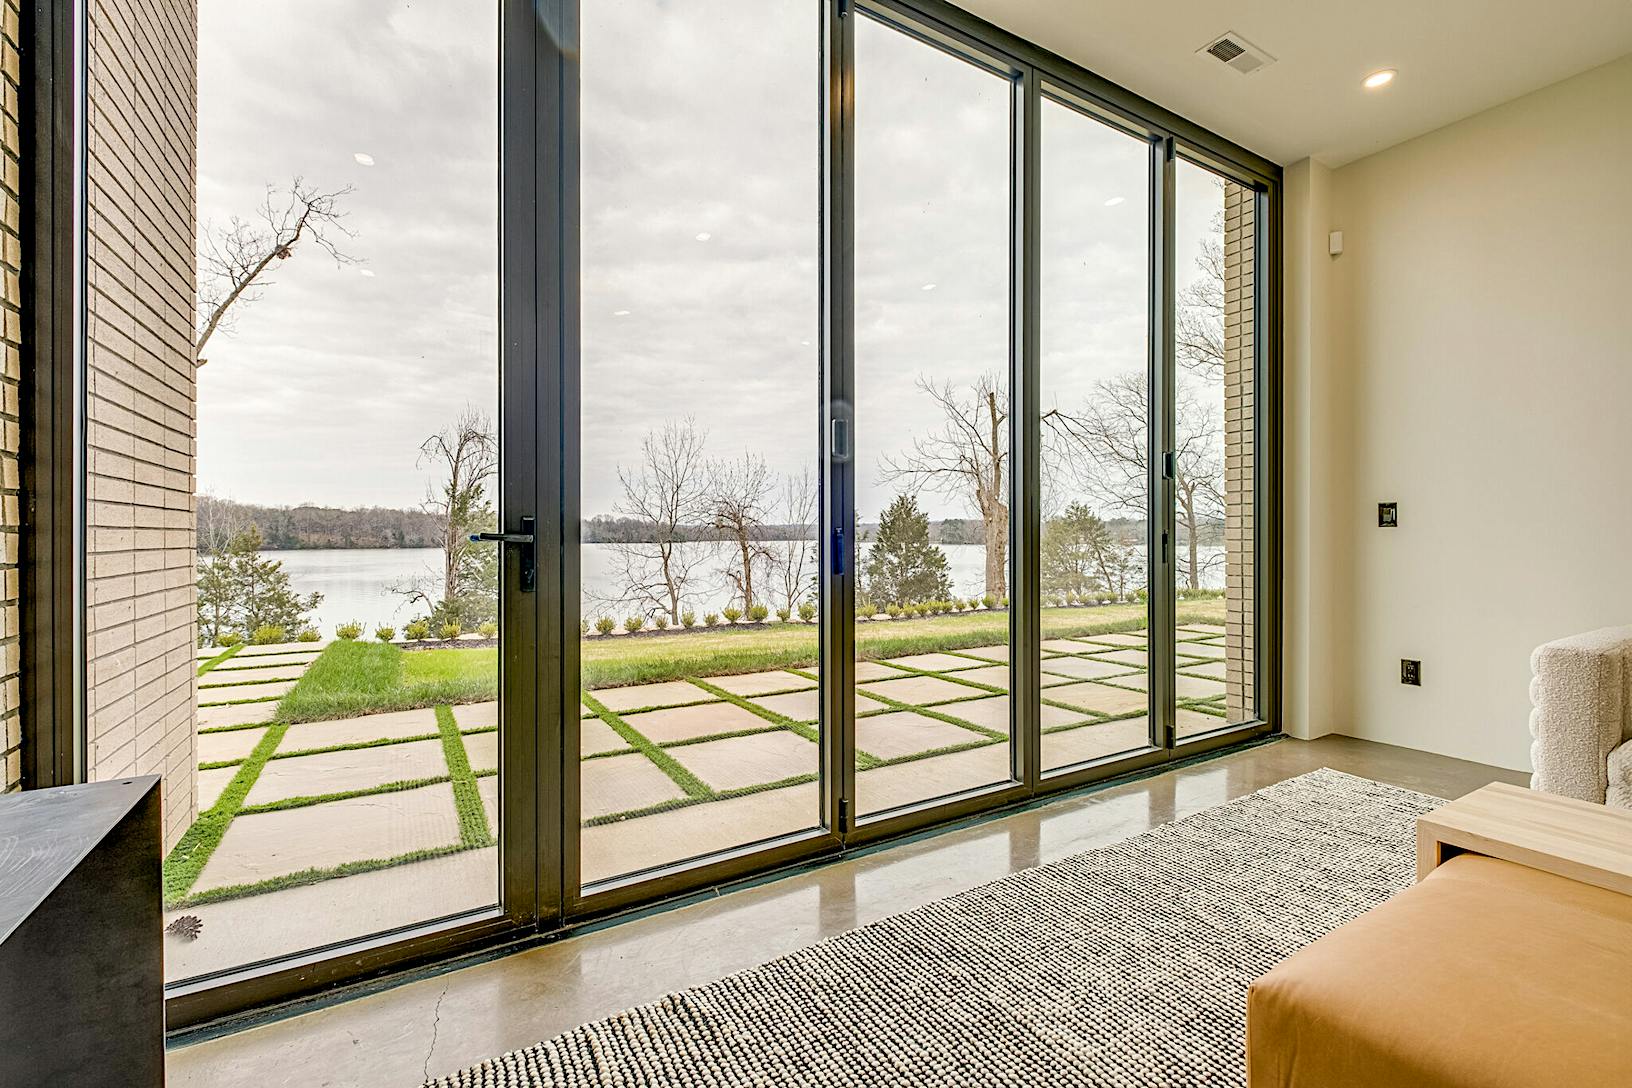 Modern living room with all glass walls overlooking a patio and lawn beside a lake.